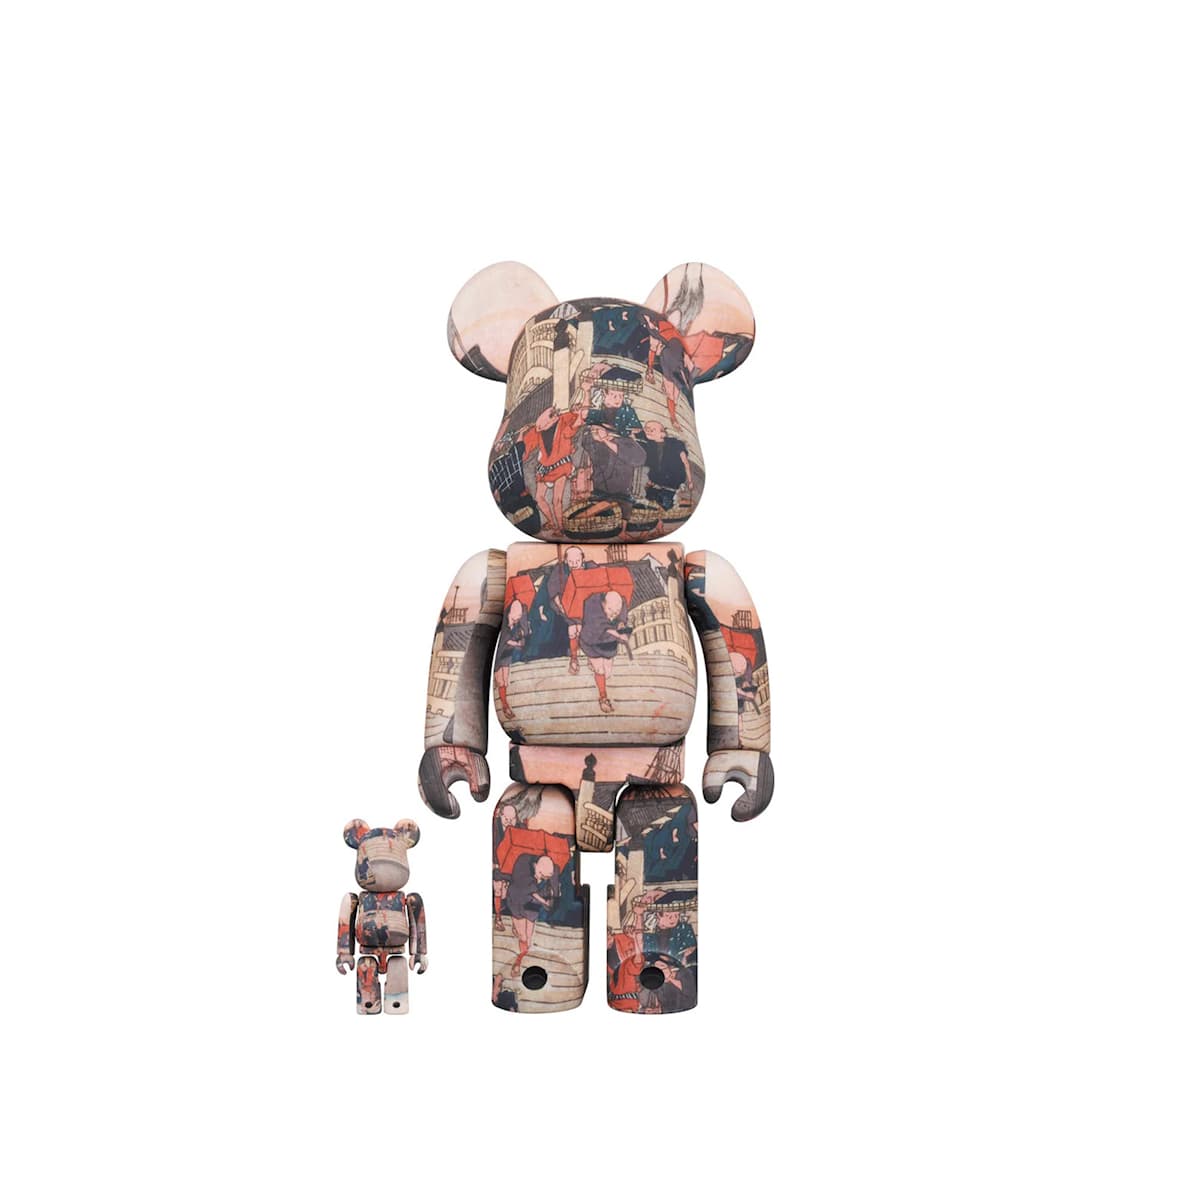 Buy BE@RBRICK Pink Heart 400% 100% from Medicom Toy